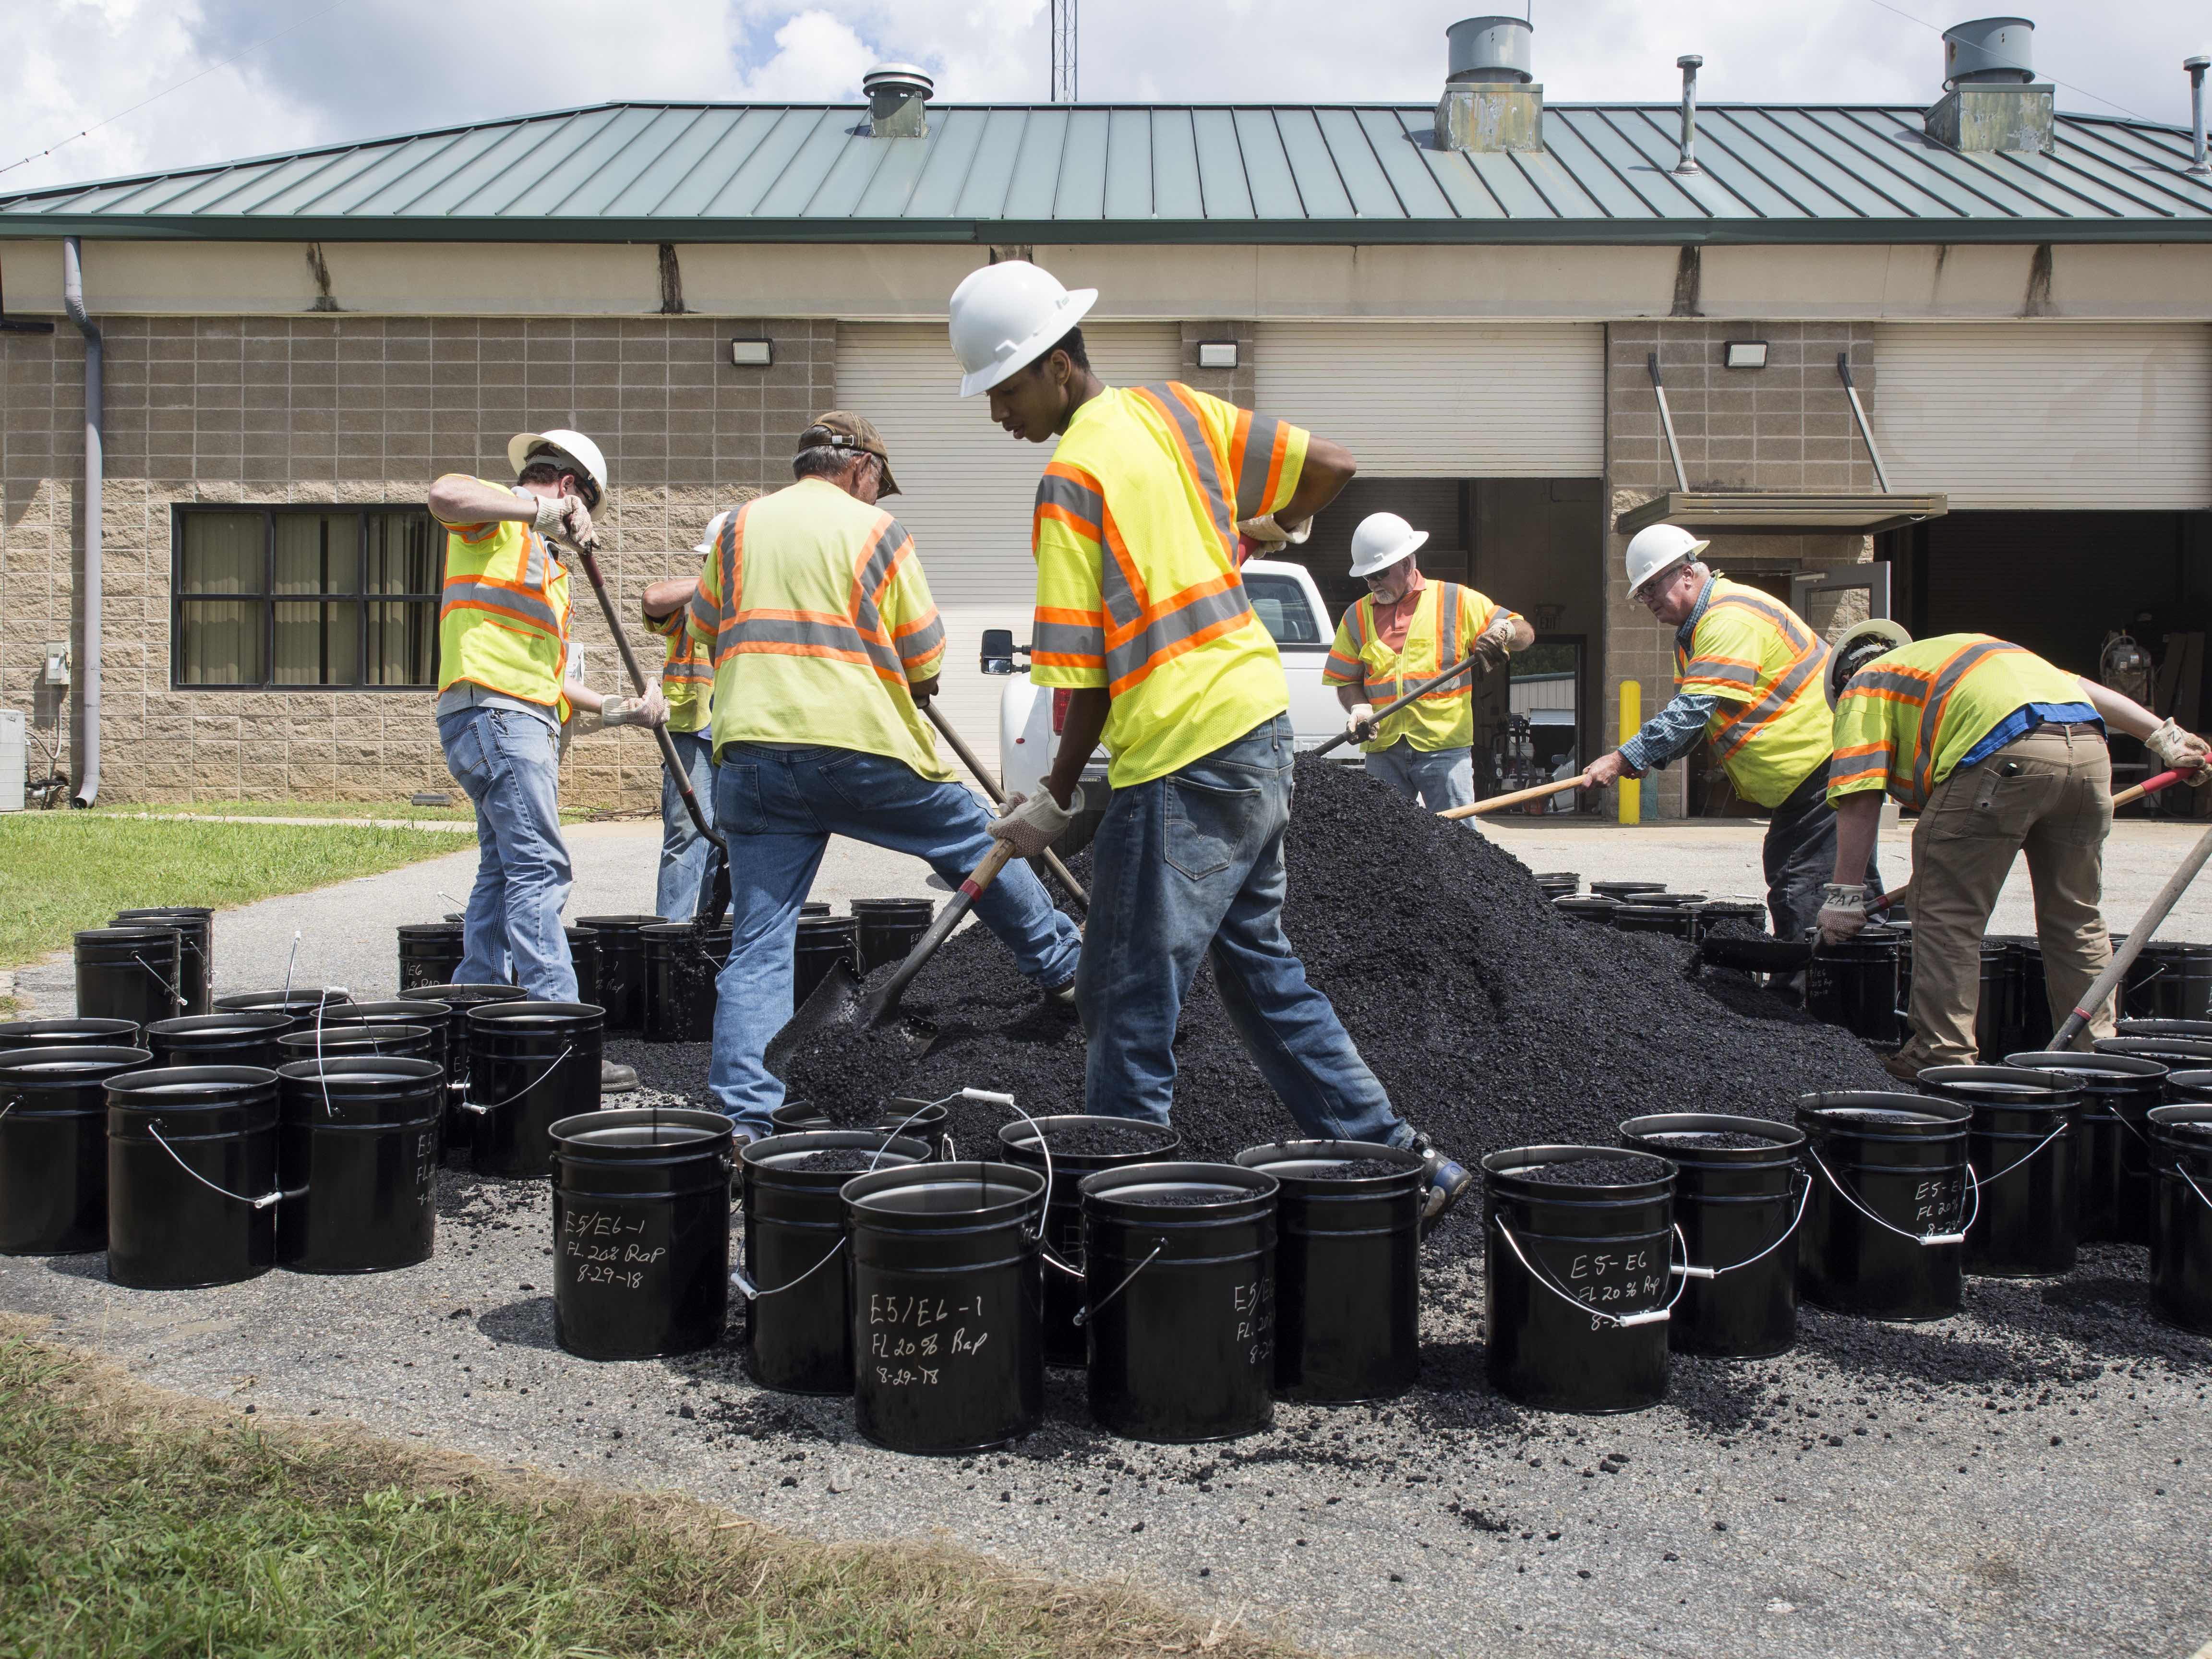 NCAT employees and students shoveled over 1000 buckets of asphalt mix during construction for laboratory testing.